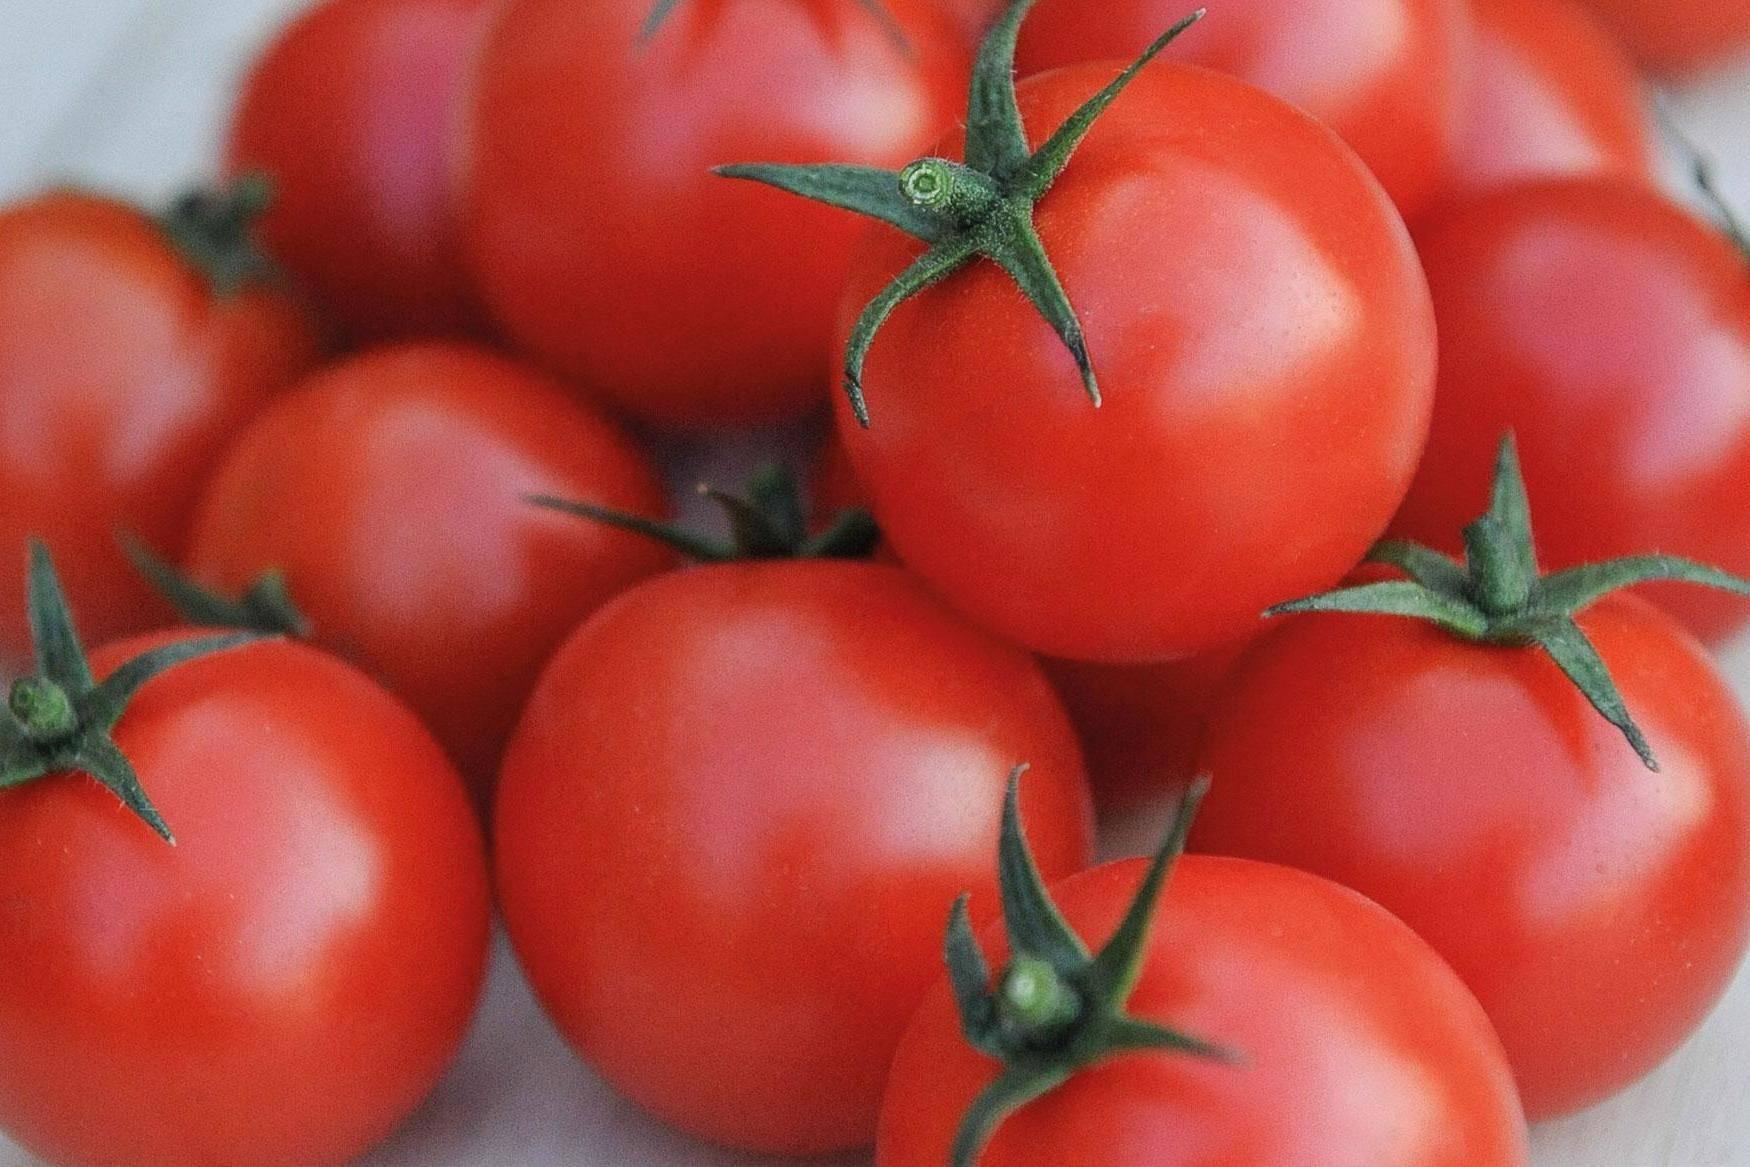 Big Natural Uk - Tomato porn is taking social media by storm â€“ they're big ...